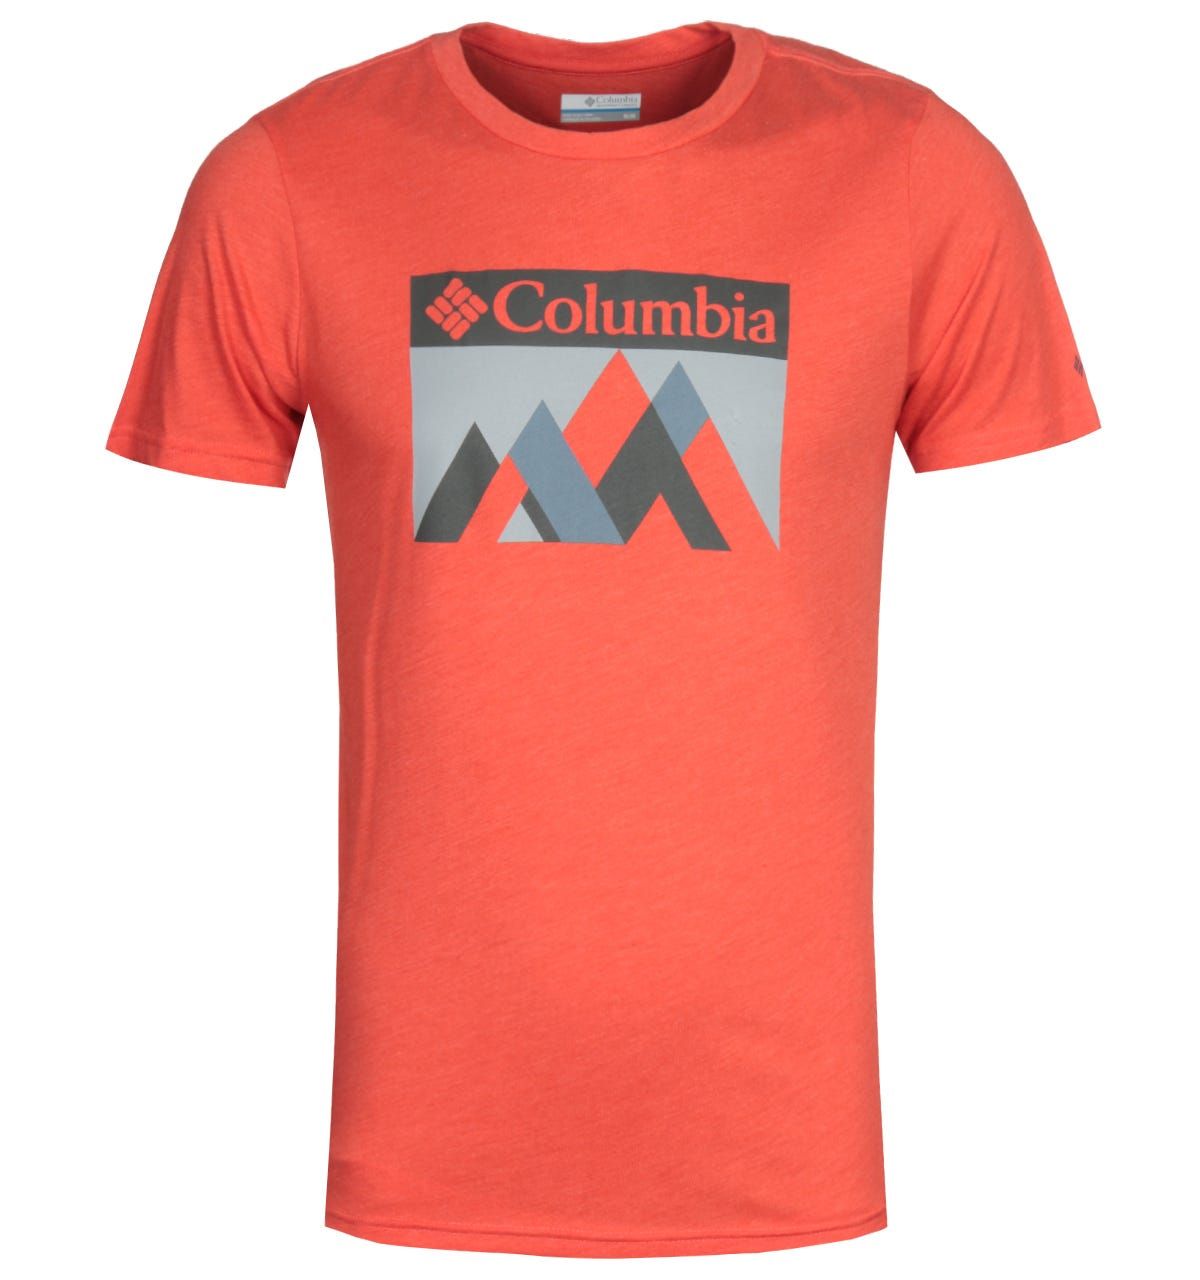 <p>This is the Alpine Way Graphic T-Shirt in Wildfire Peak Fun by Columbia. Columbia Sportswear is a global outdoor brand based in Portland. They specialise in crafting active lifestyle gear with industry leading technologies. Columbia\'s apparel, footwear, and accessories reflect their Pacific Northwest heritage and indomitable spirit.</p><ul><li>Front Logo</li><li>Crew neck collar</li><li>Columbia branding</li><li>Super soft</li><li>Cotton blend</li></ul><p>Style & Fit</p><ul><li>Active Fit: Body skimming fit with end-use mobility in mind</li></ul><p>Composition & Care</p><ul><li>55% Cotton 34% Polyester 11% Rayon</li><li>Machine Wash</li></ul>